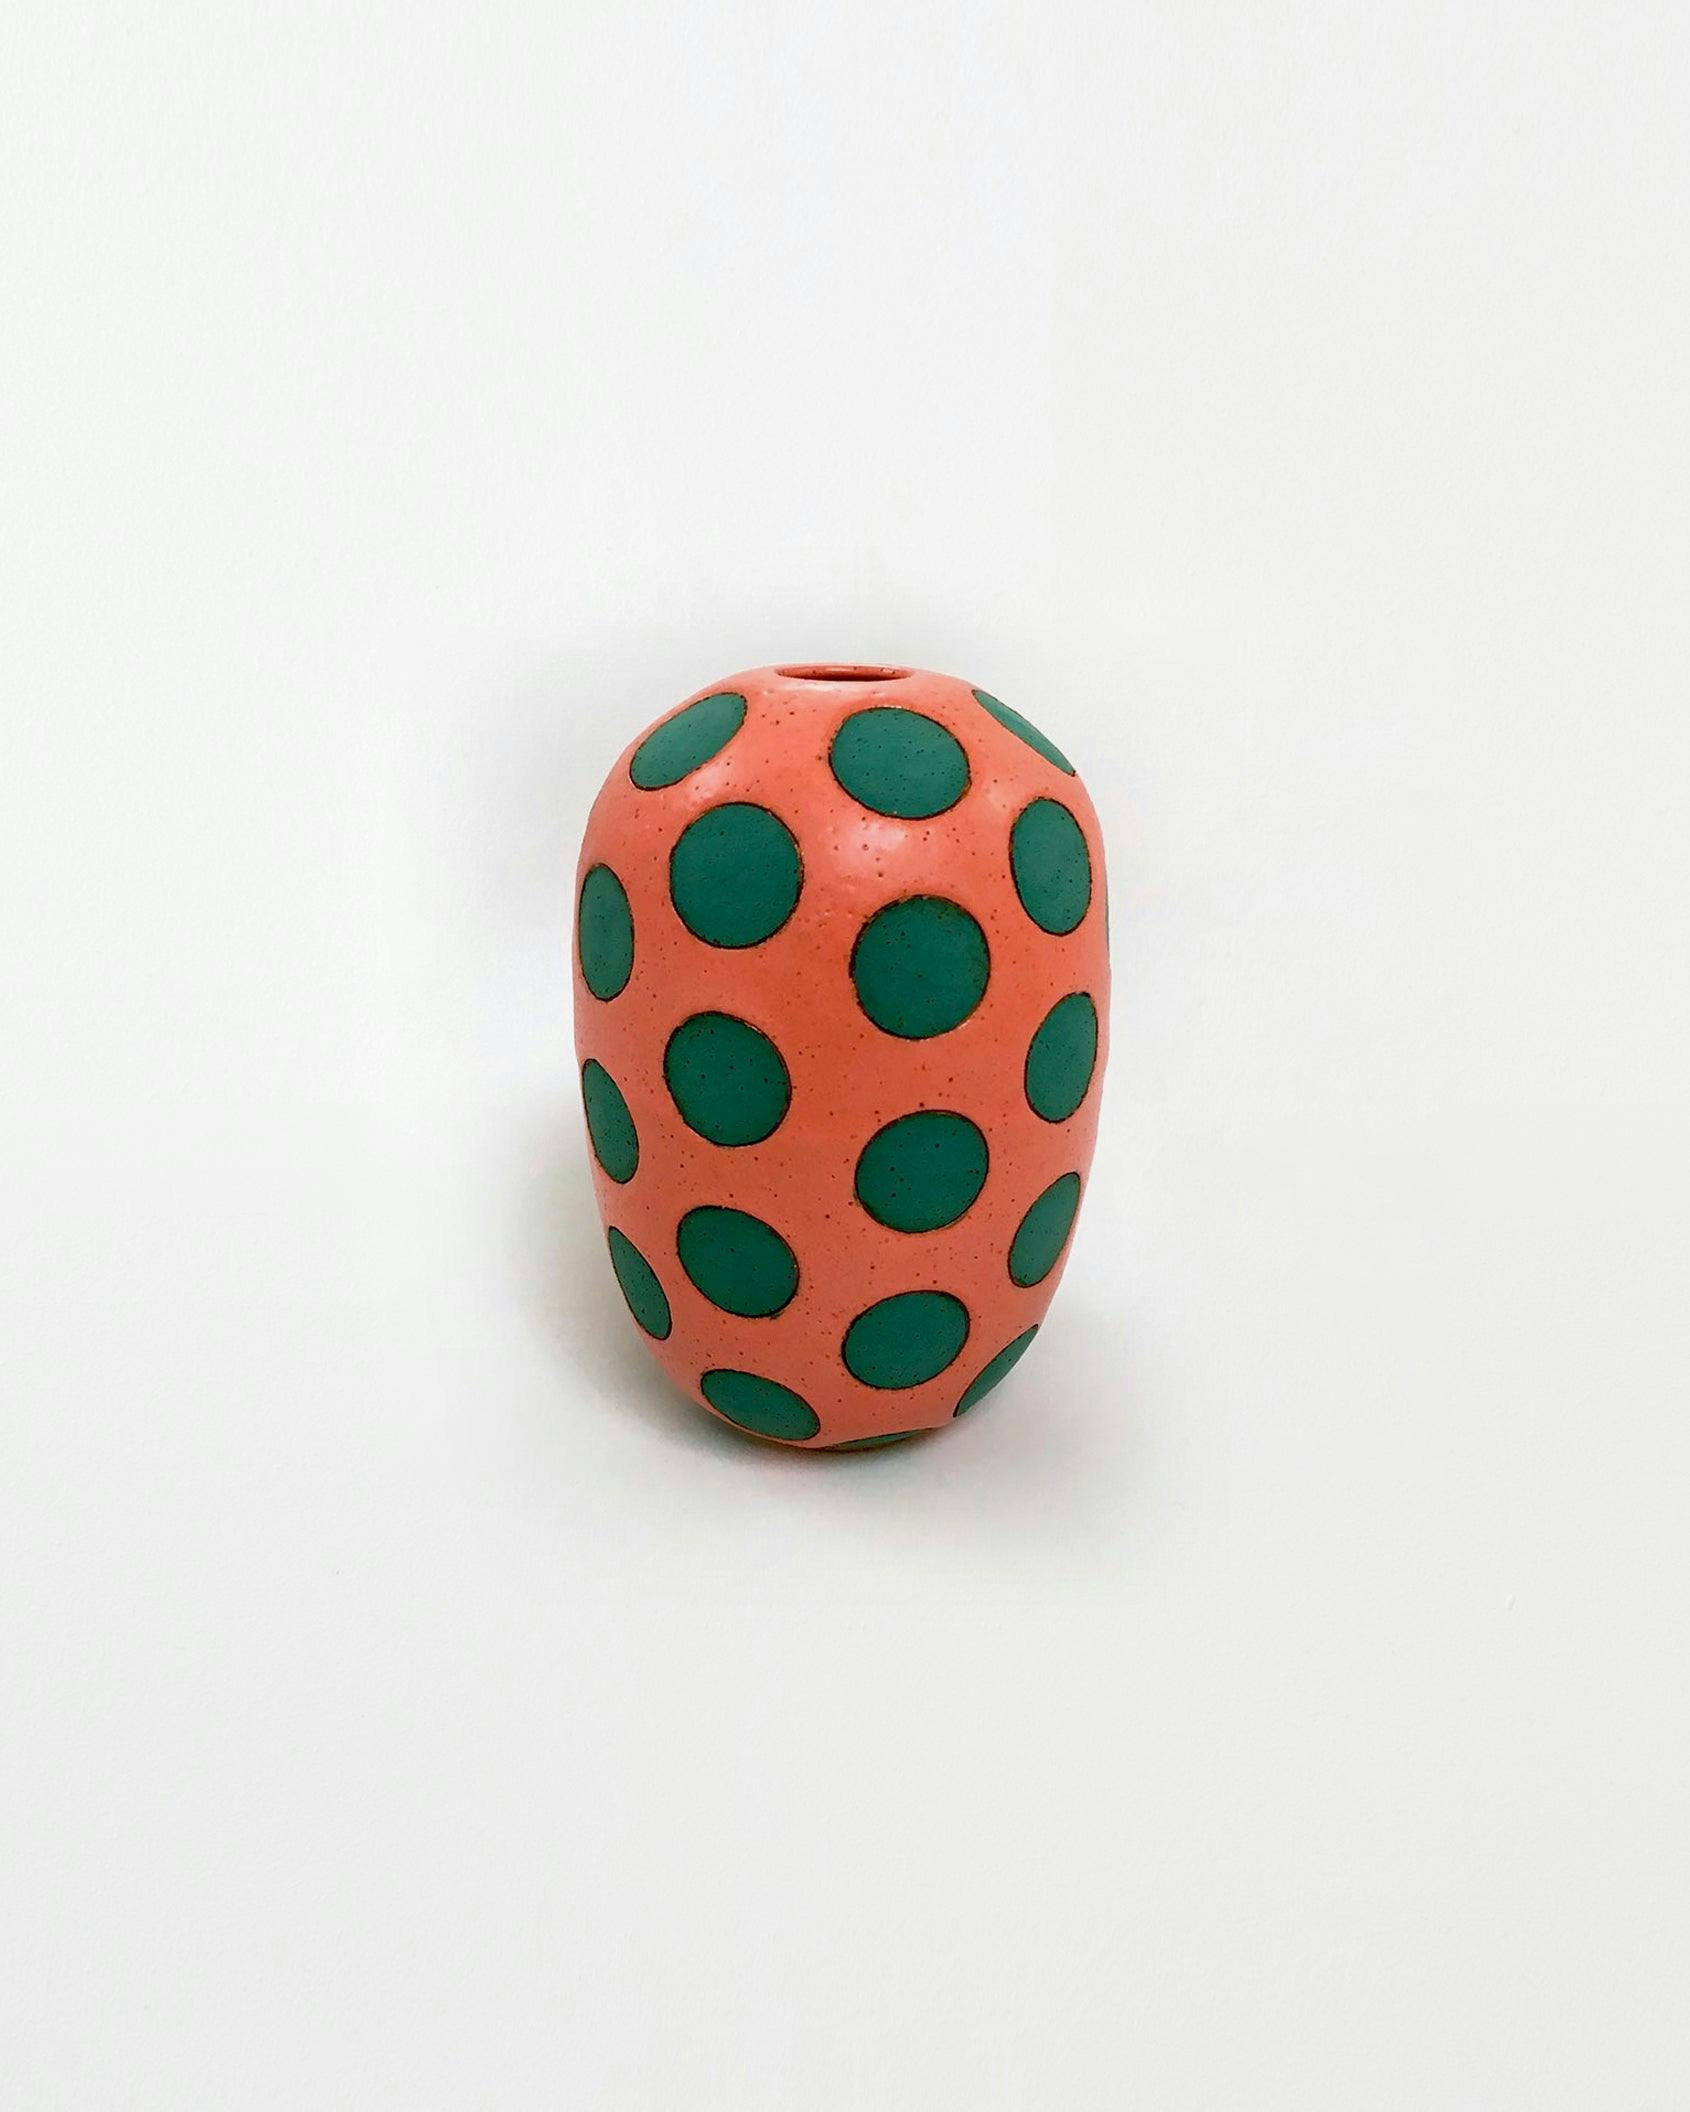 Sculpture by Matthew Ward titled "Coral and Green Polka Dot Vase".